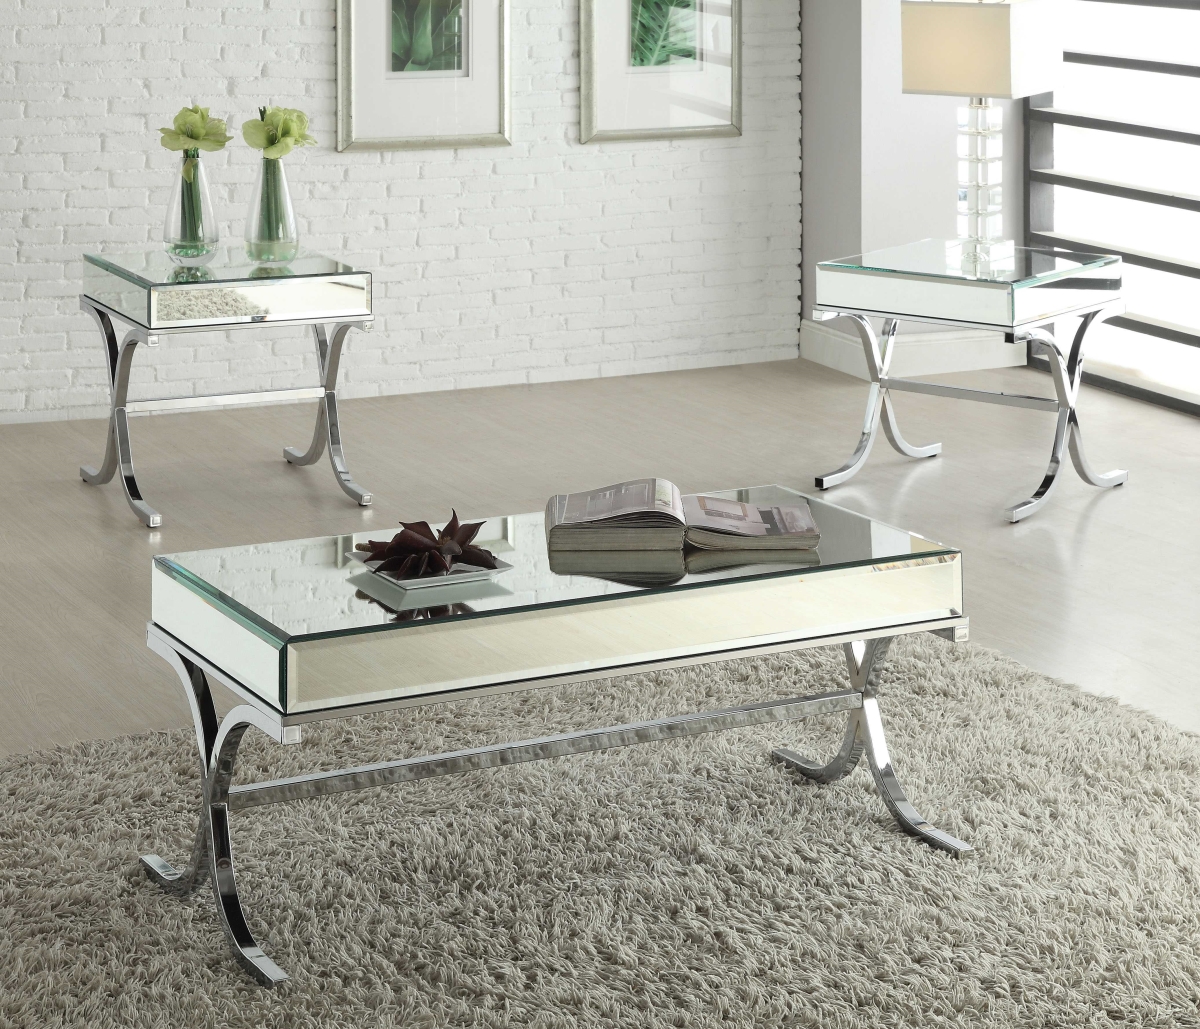 Home Roots Furniture 286043 22 X 21 X 21 In. Mirrored Top Tube End Table - Chrome